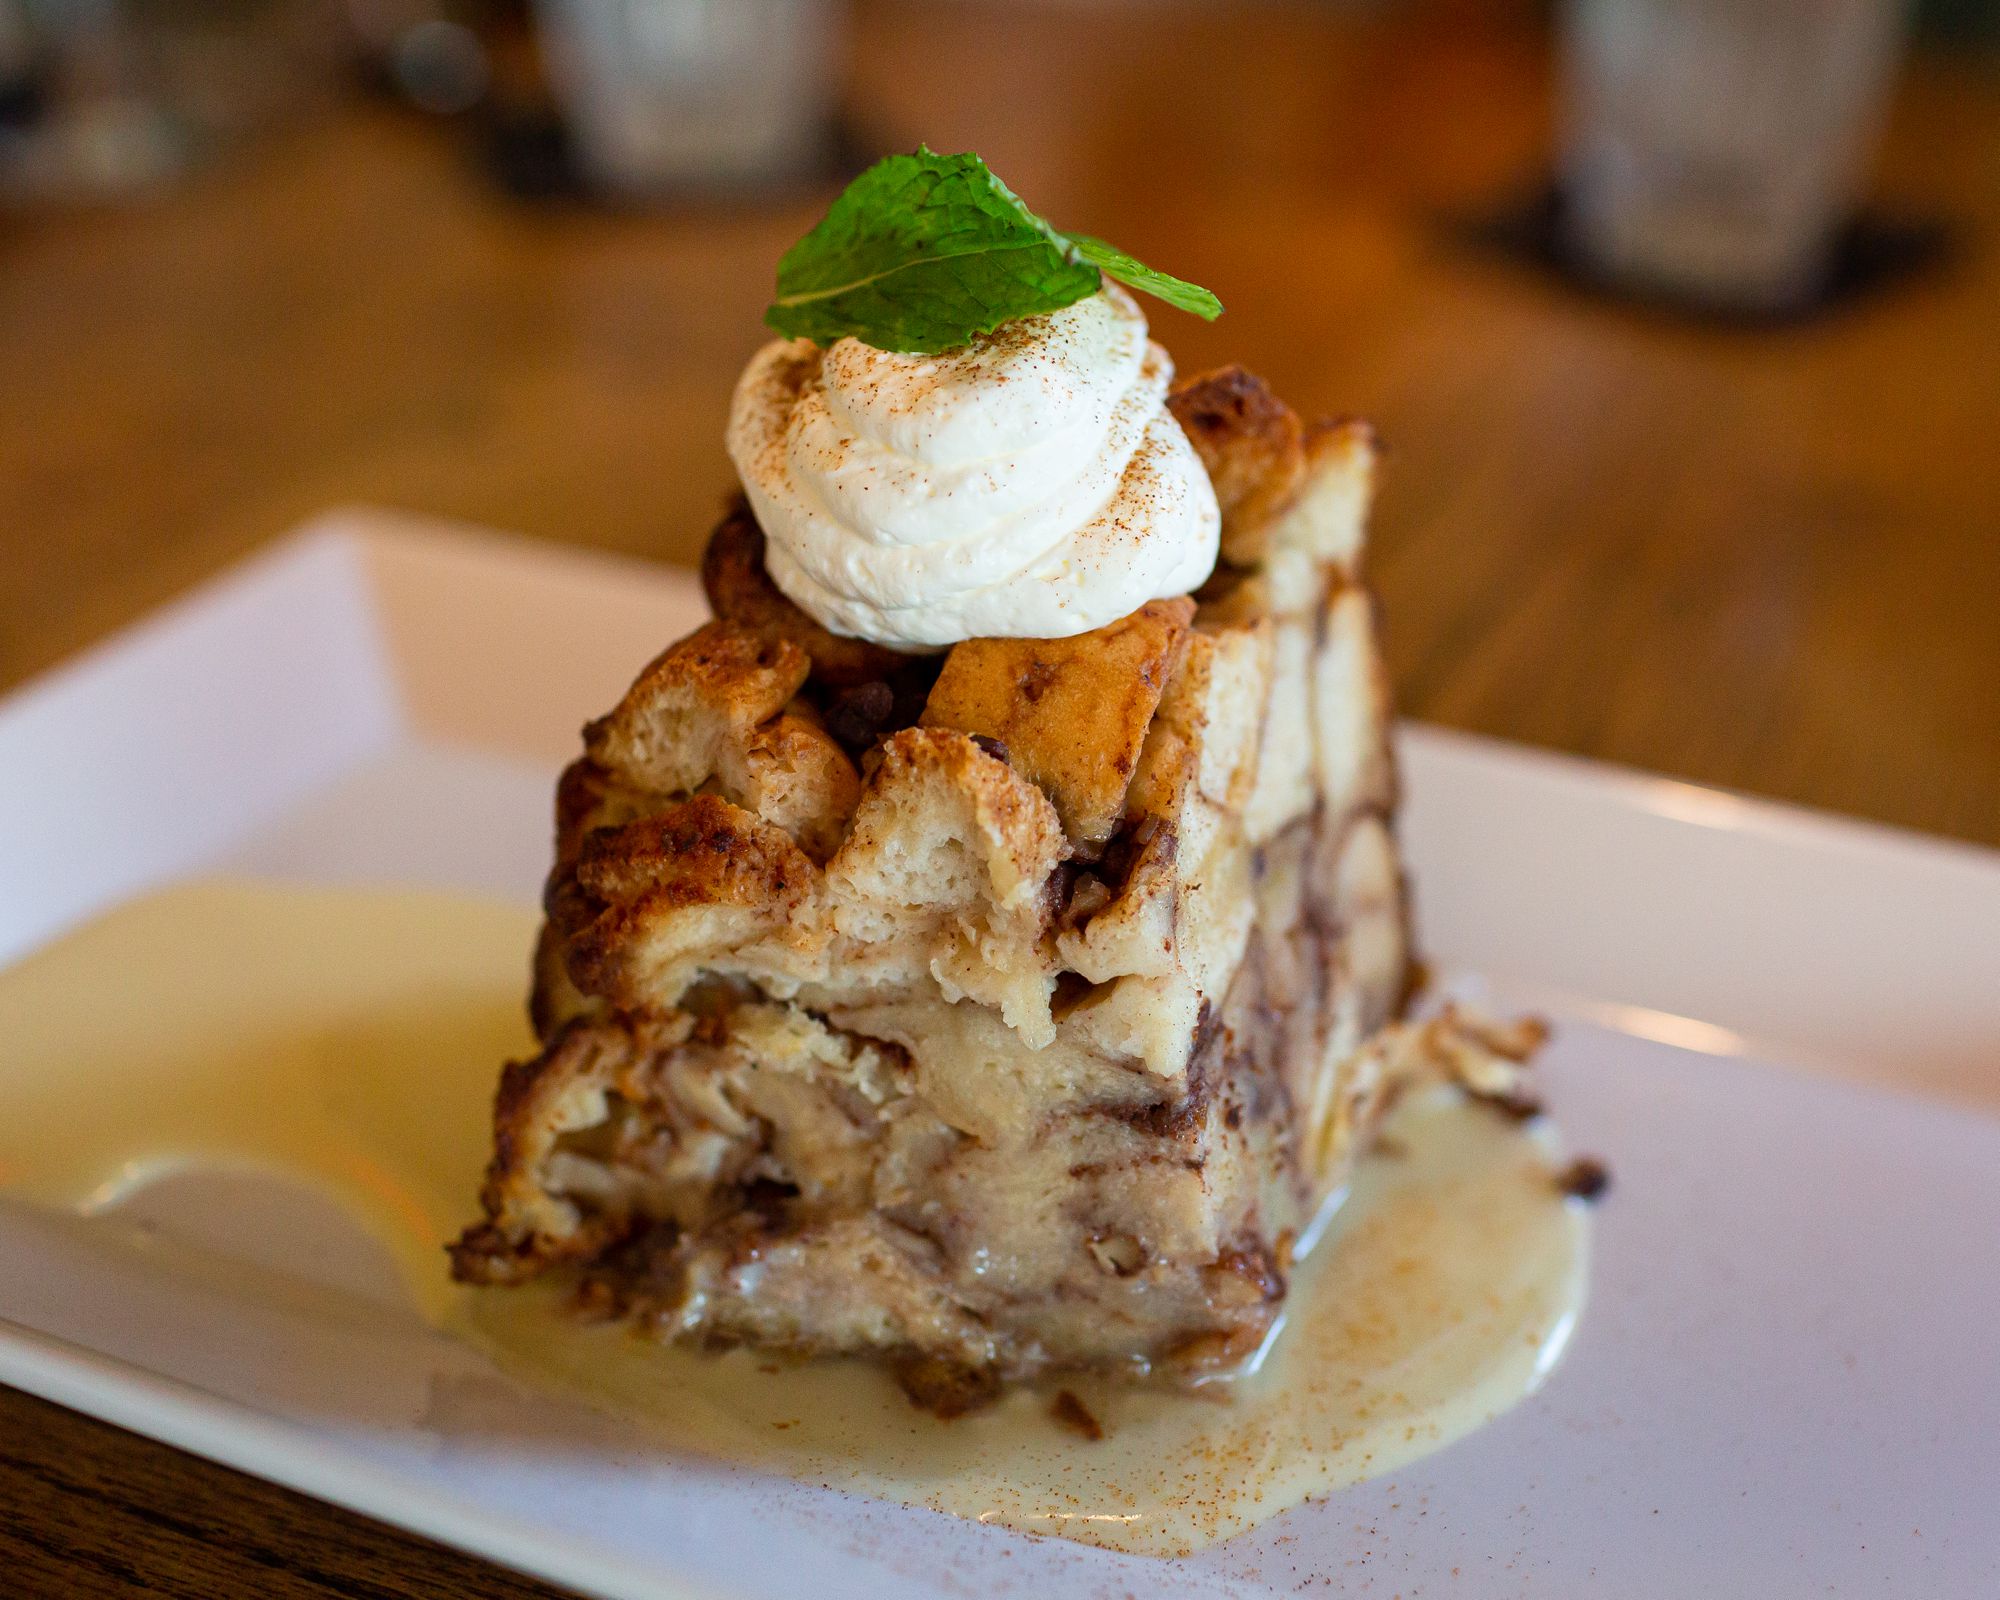 Bread pudding at BLVD Seafood in Galveston, Texas.